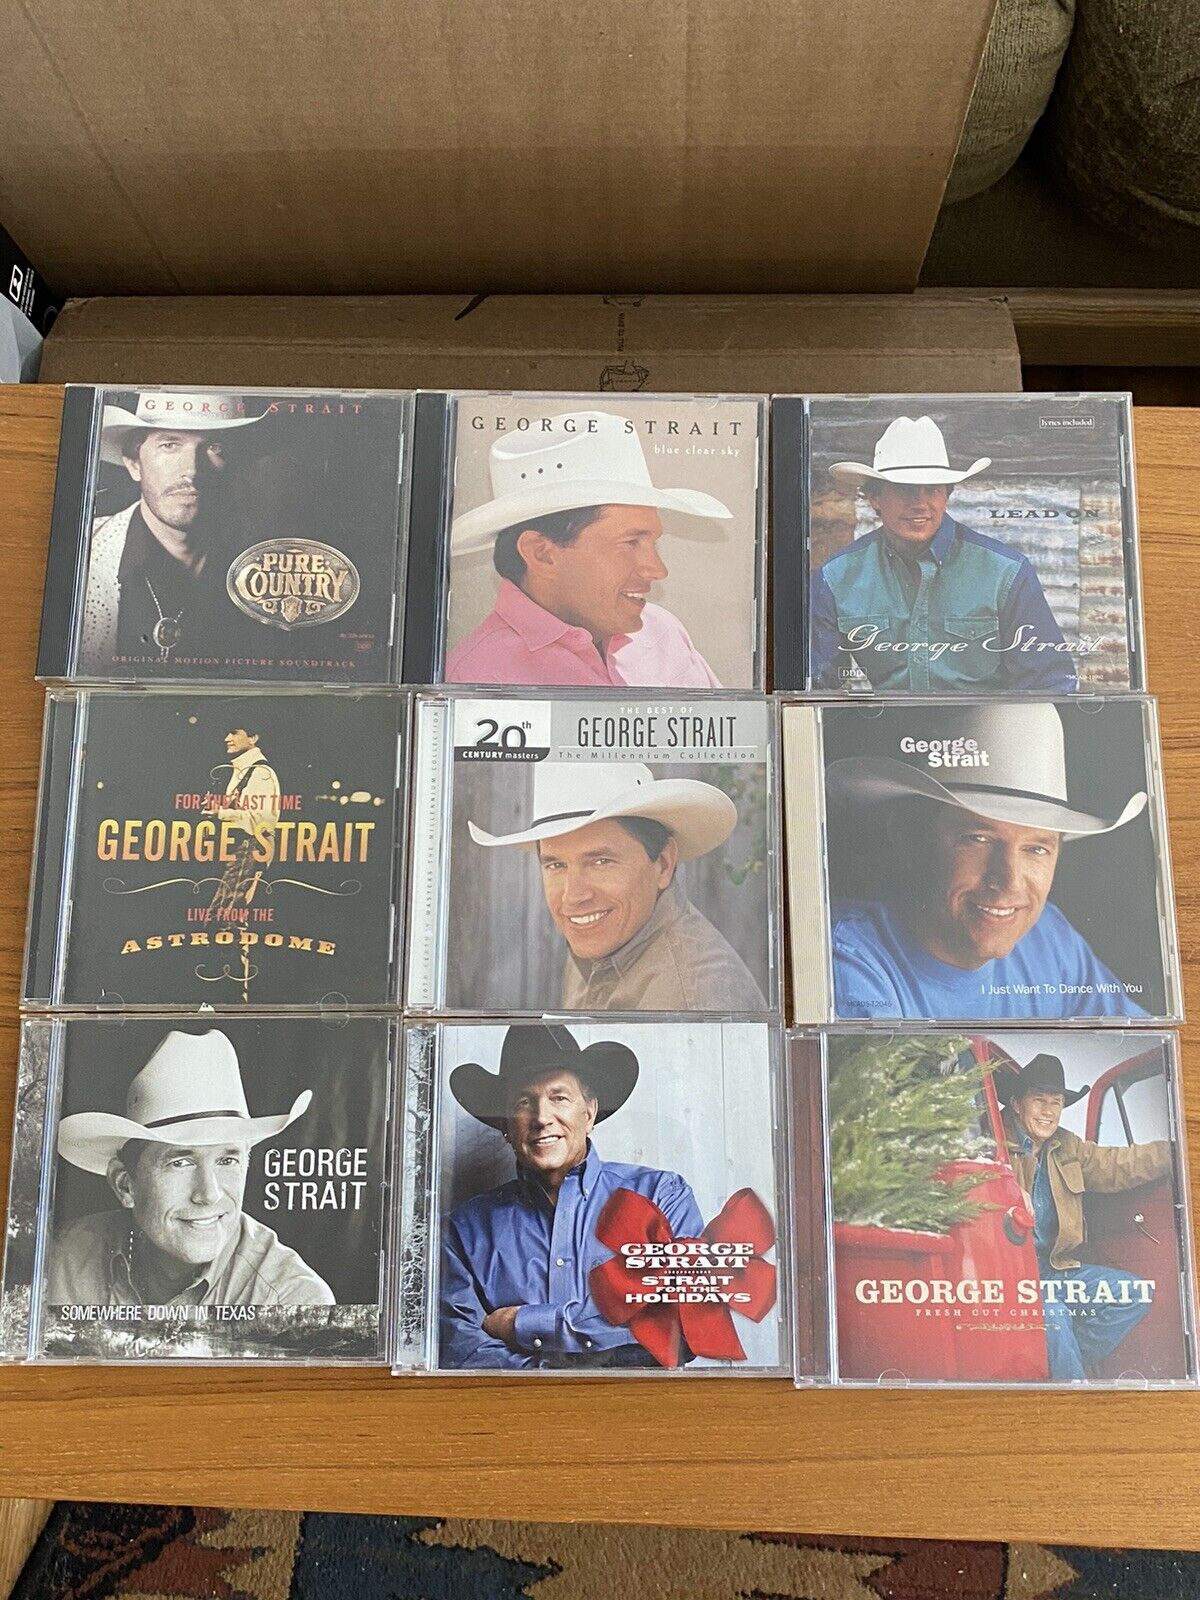 GEORGE STRAIT Collection 9 CDs: Pure Country, Best of, Blue Clear Sky +6 More